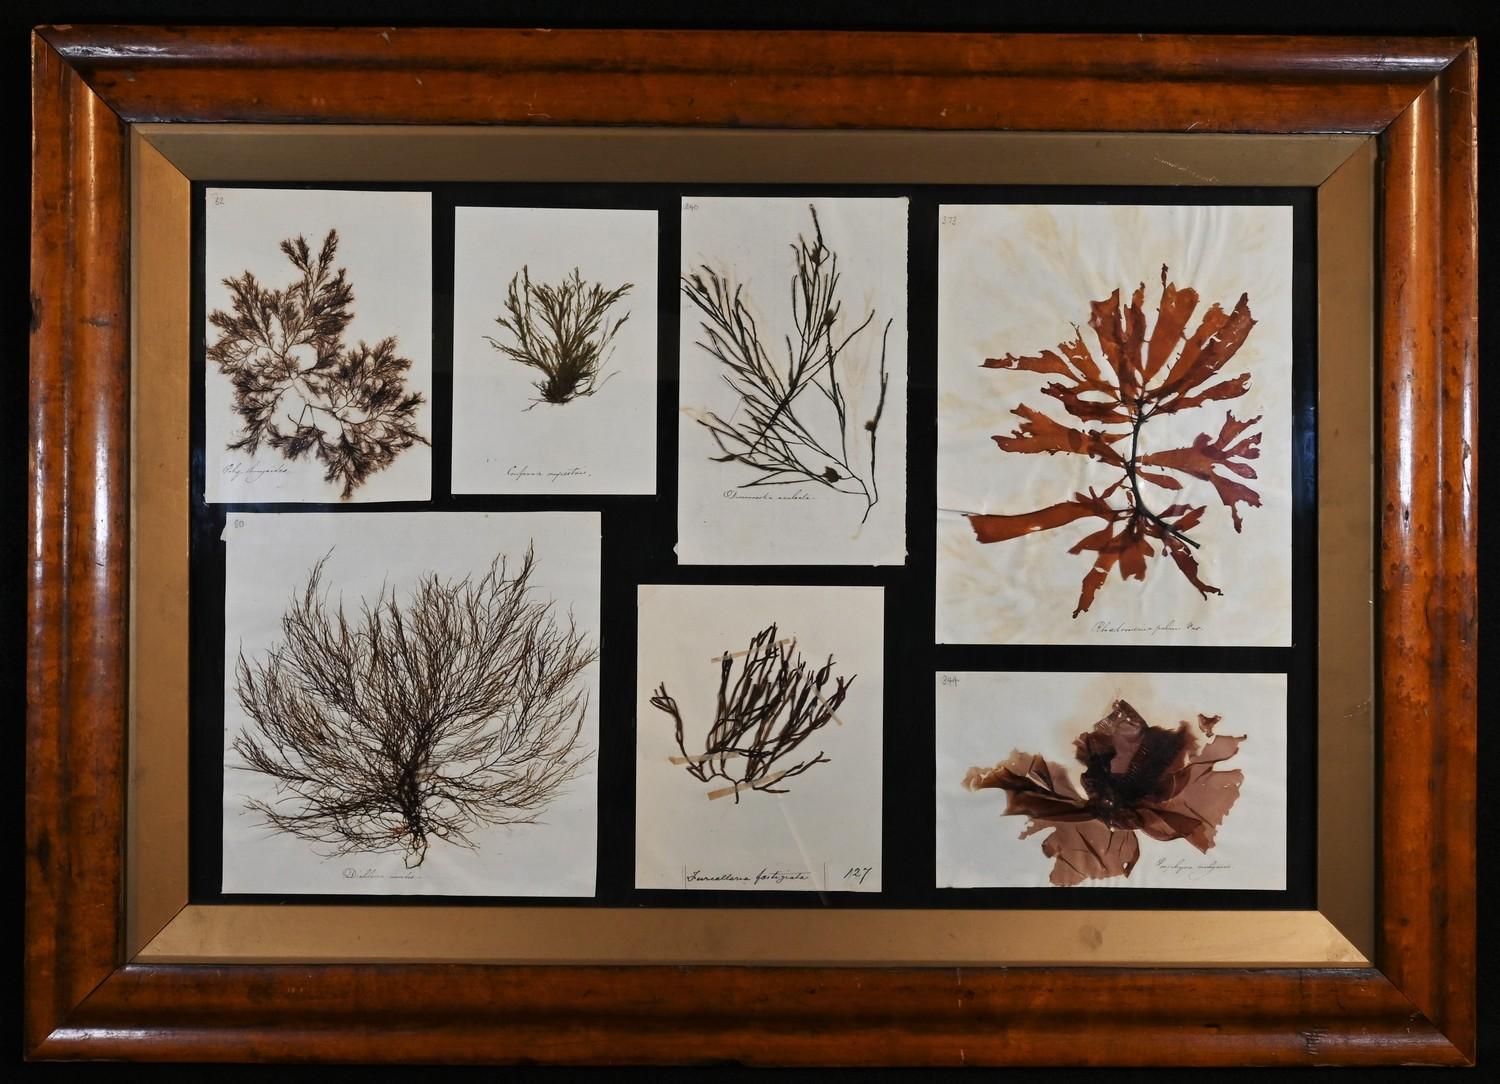 Natural History - a 'herbarium' arrangement of pressed and mounted seaweed specimens, each annotated